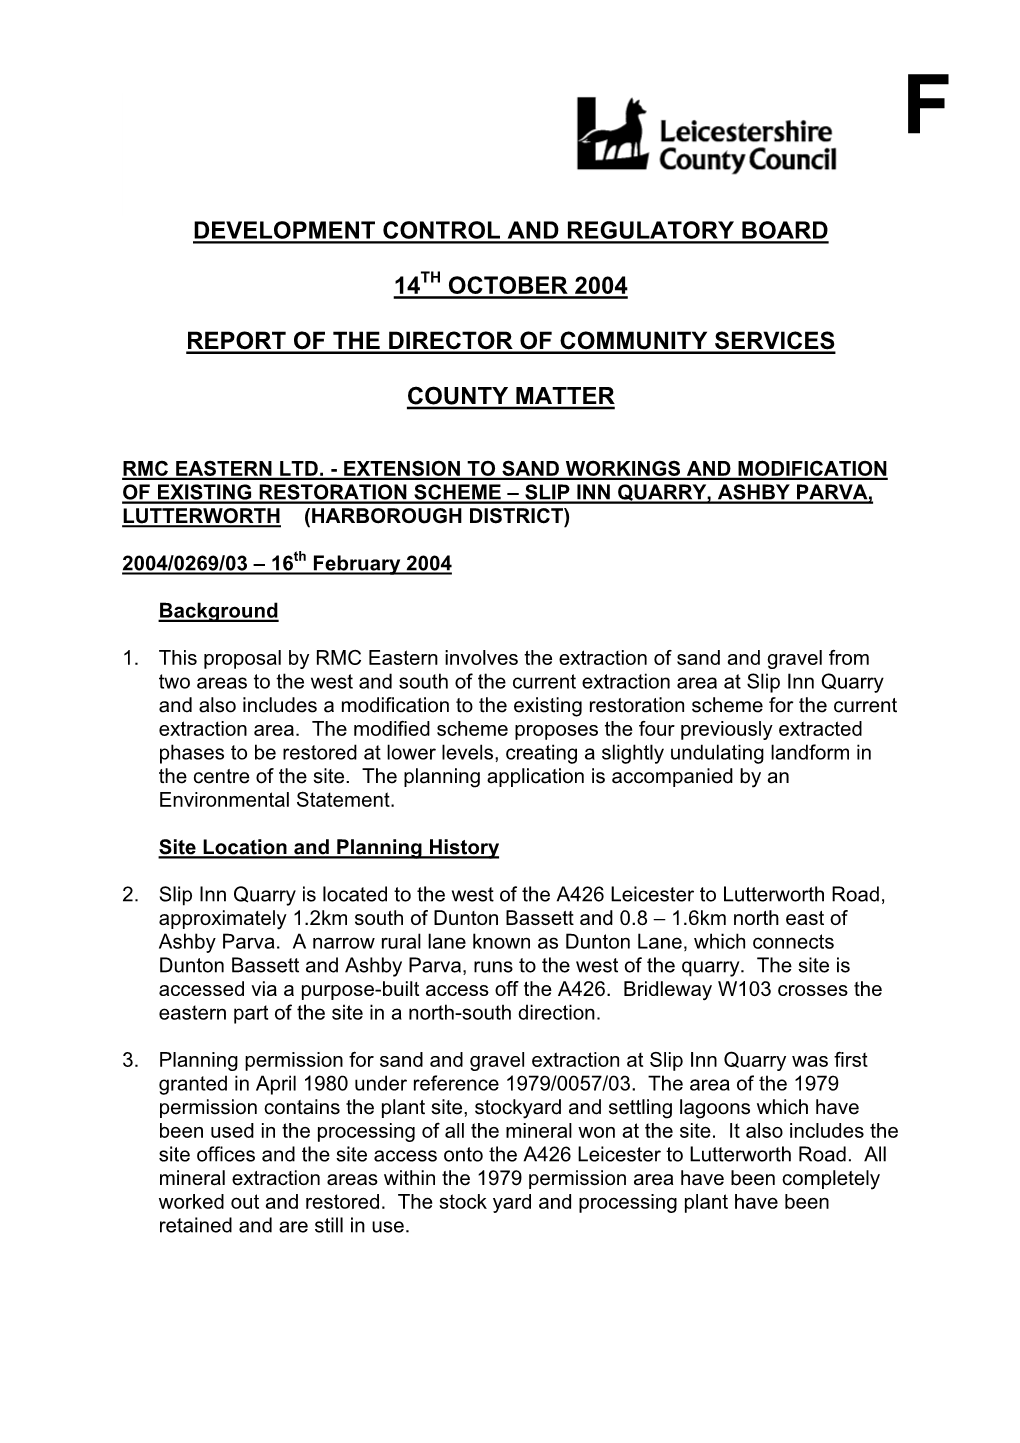 Development Control and Regulatory Board 14 October 2004 Report of the Director of Community Services County Matter